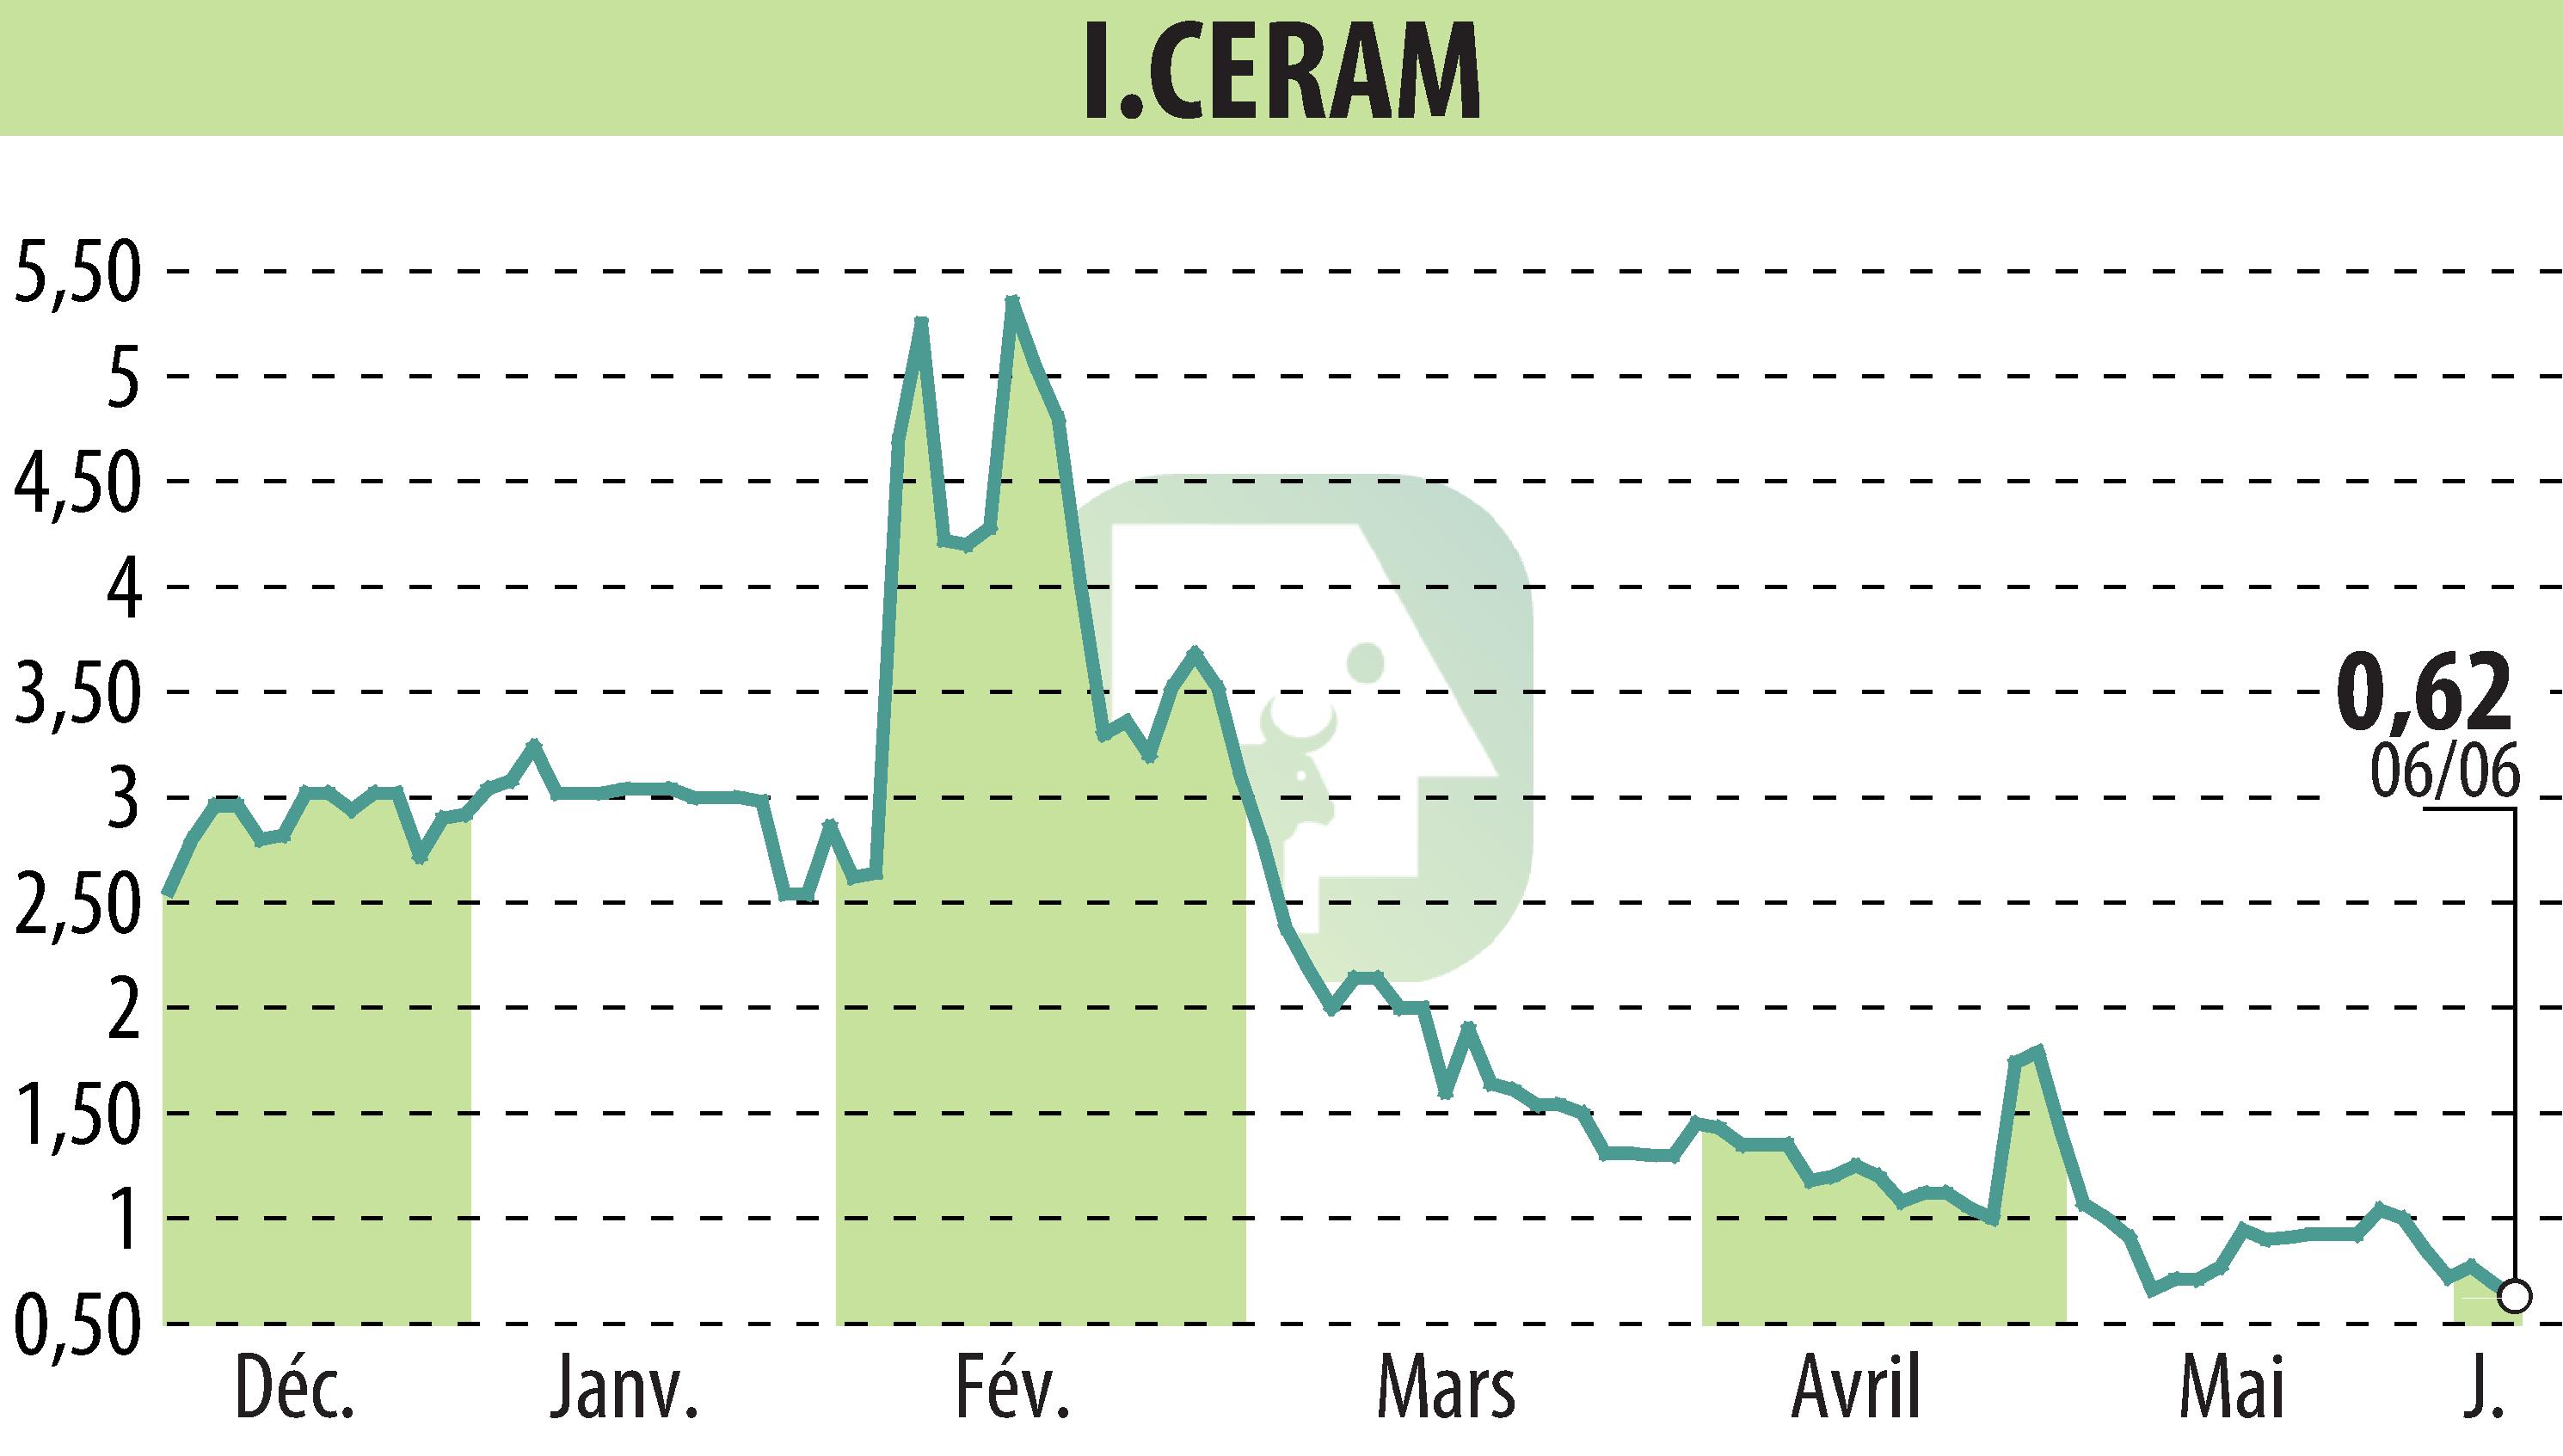 Stock price chart of I.CERAM (EPA:ALICR) showing fluctuations.